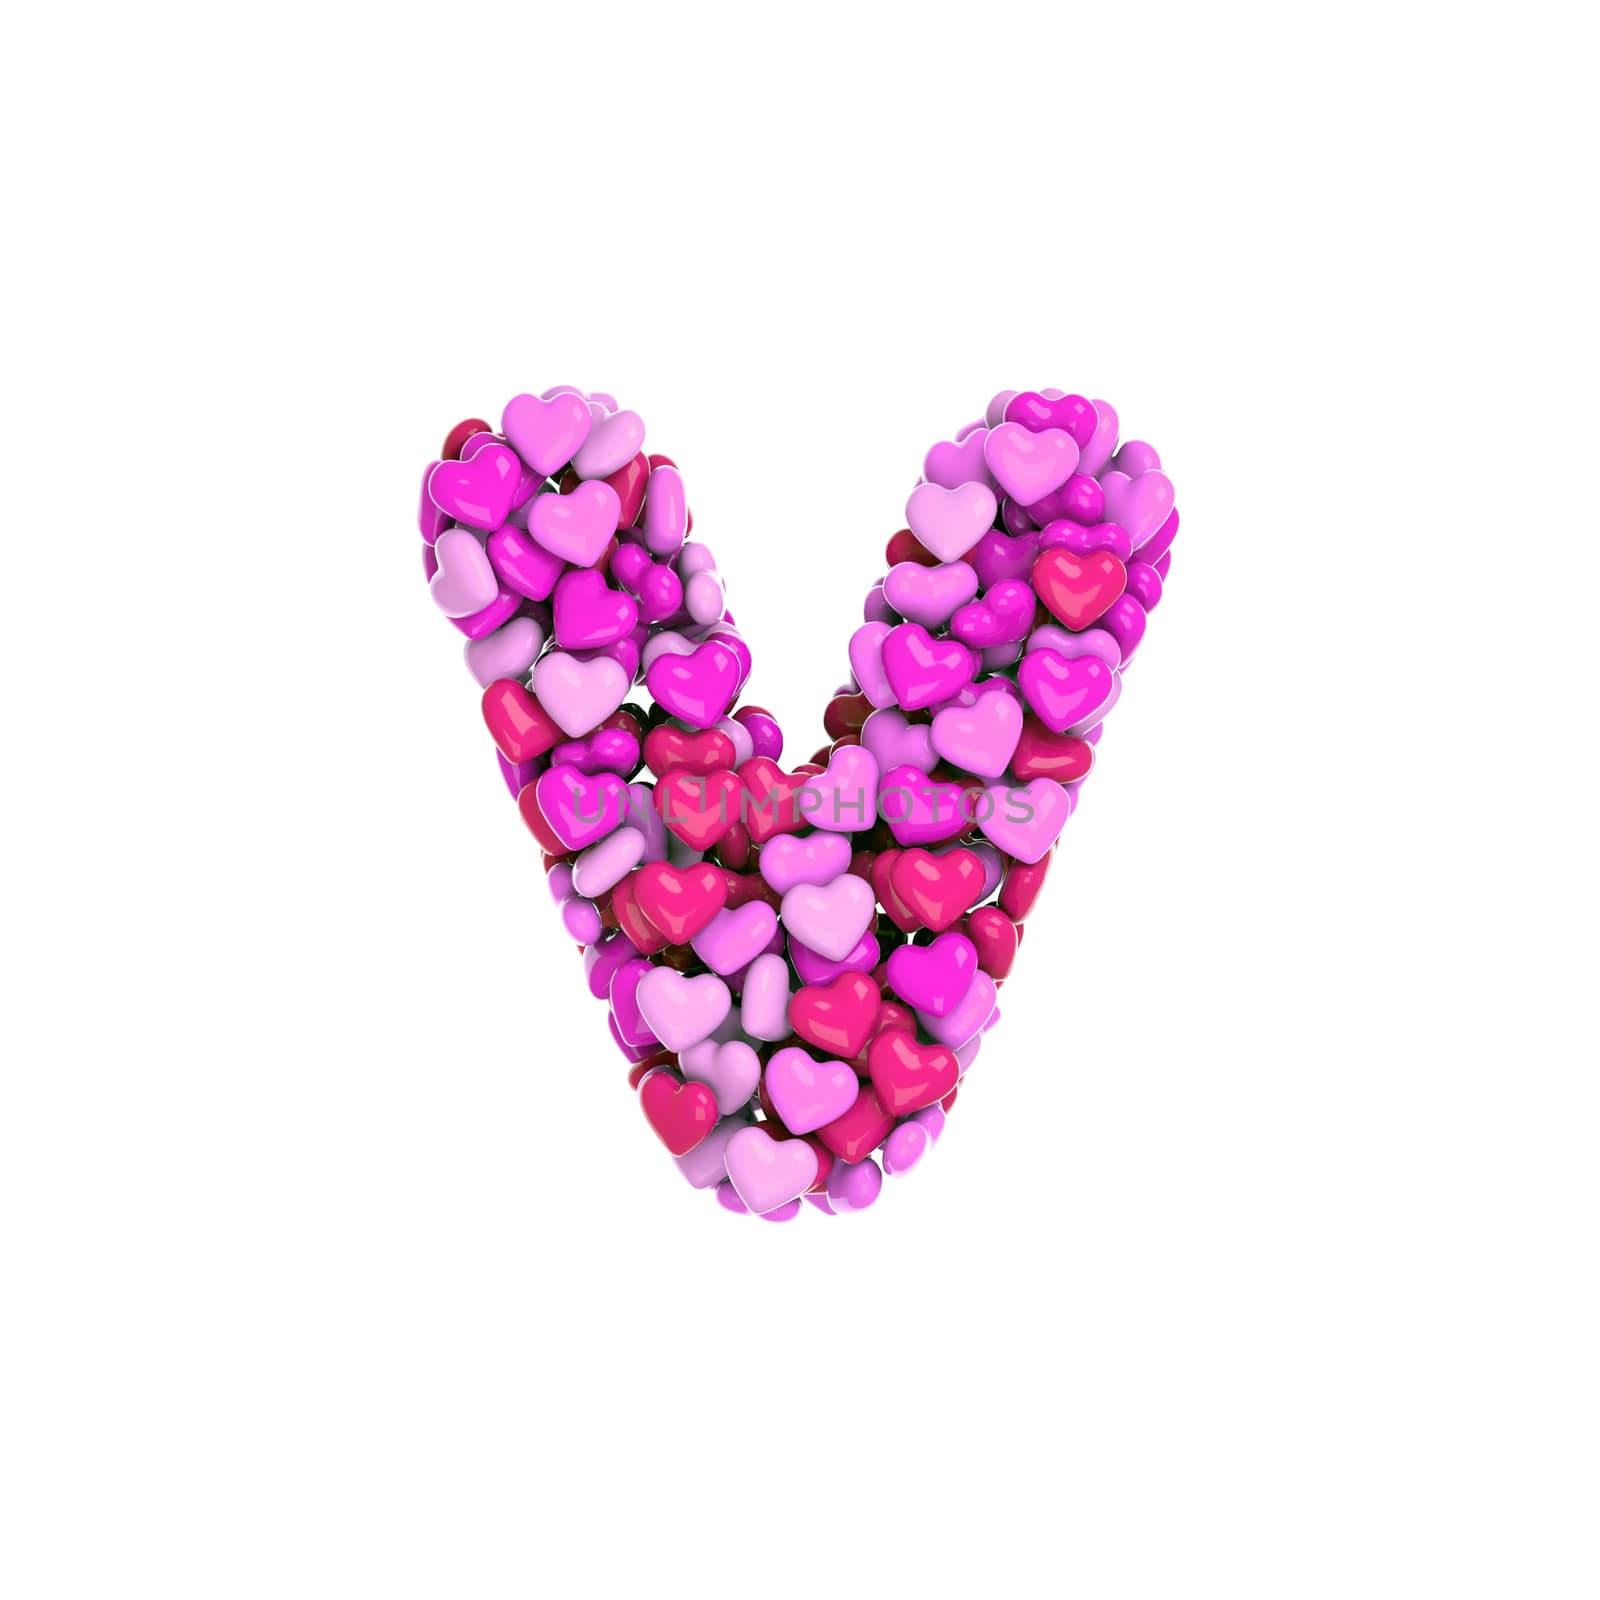 Valentine letter V - Lowercase 3d pink hearts font - Love, passion or wedding concept by chrisroll